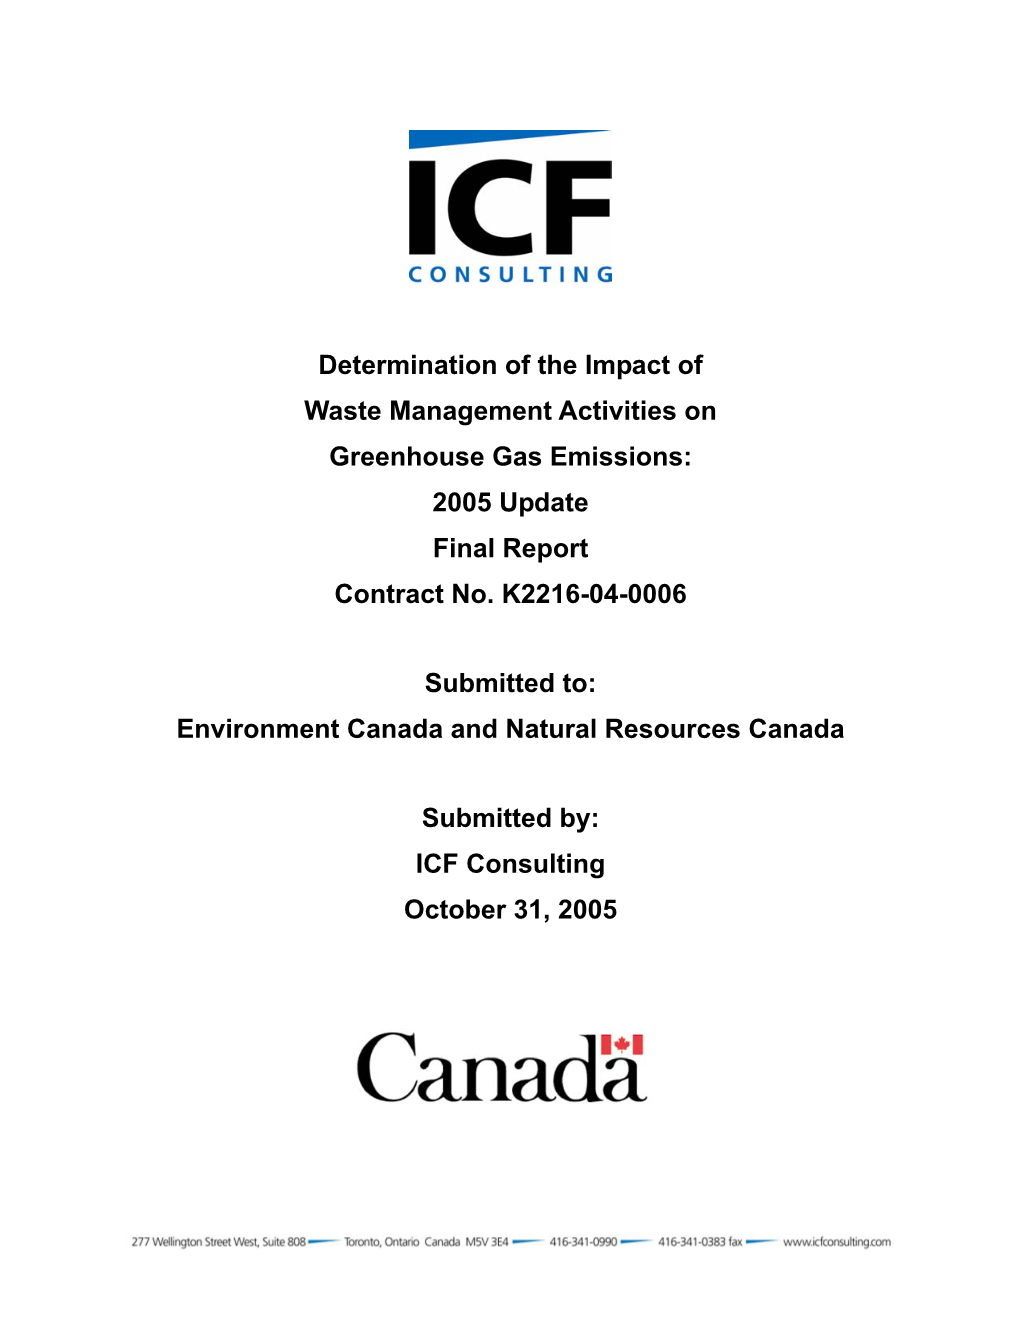 Determination of the Impact of Waste Management Activities on Greenhouse Gas Emissions: 2005 Update Final Report Contract No